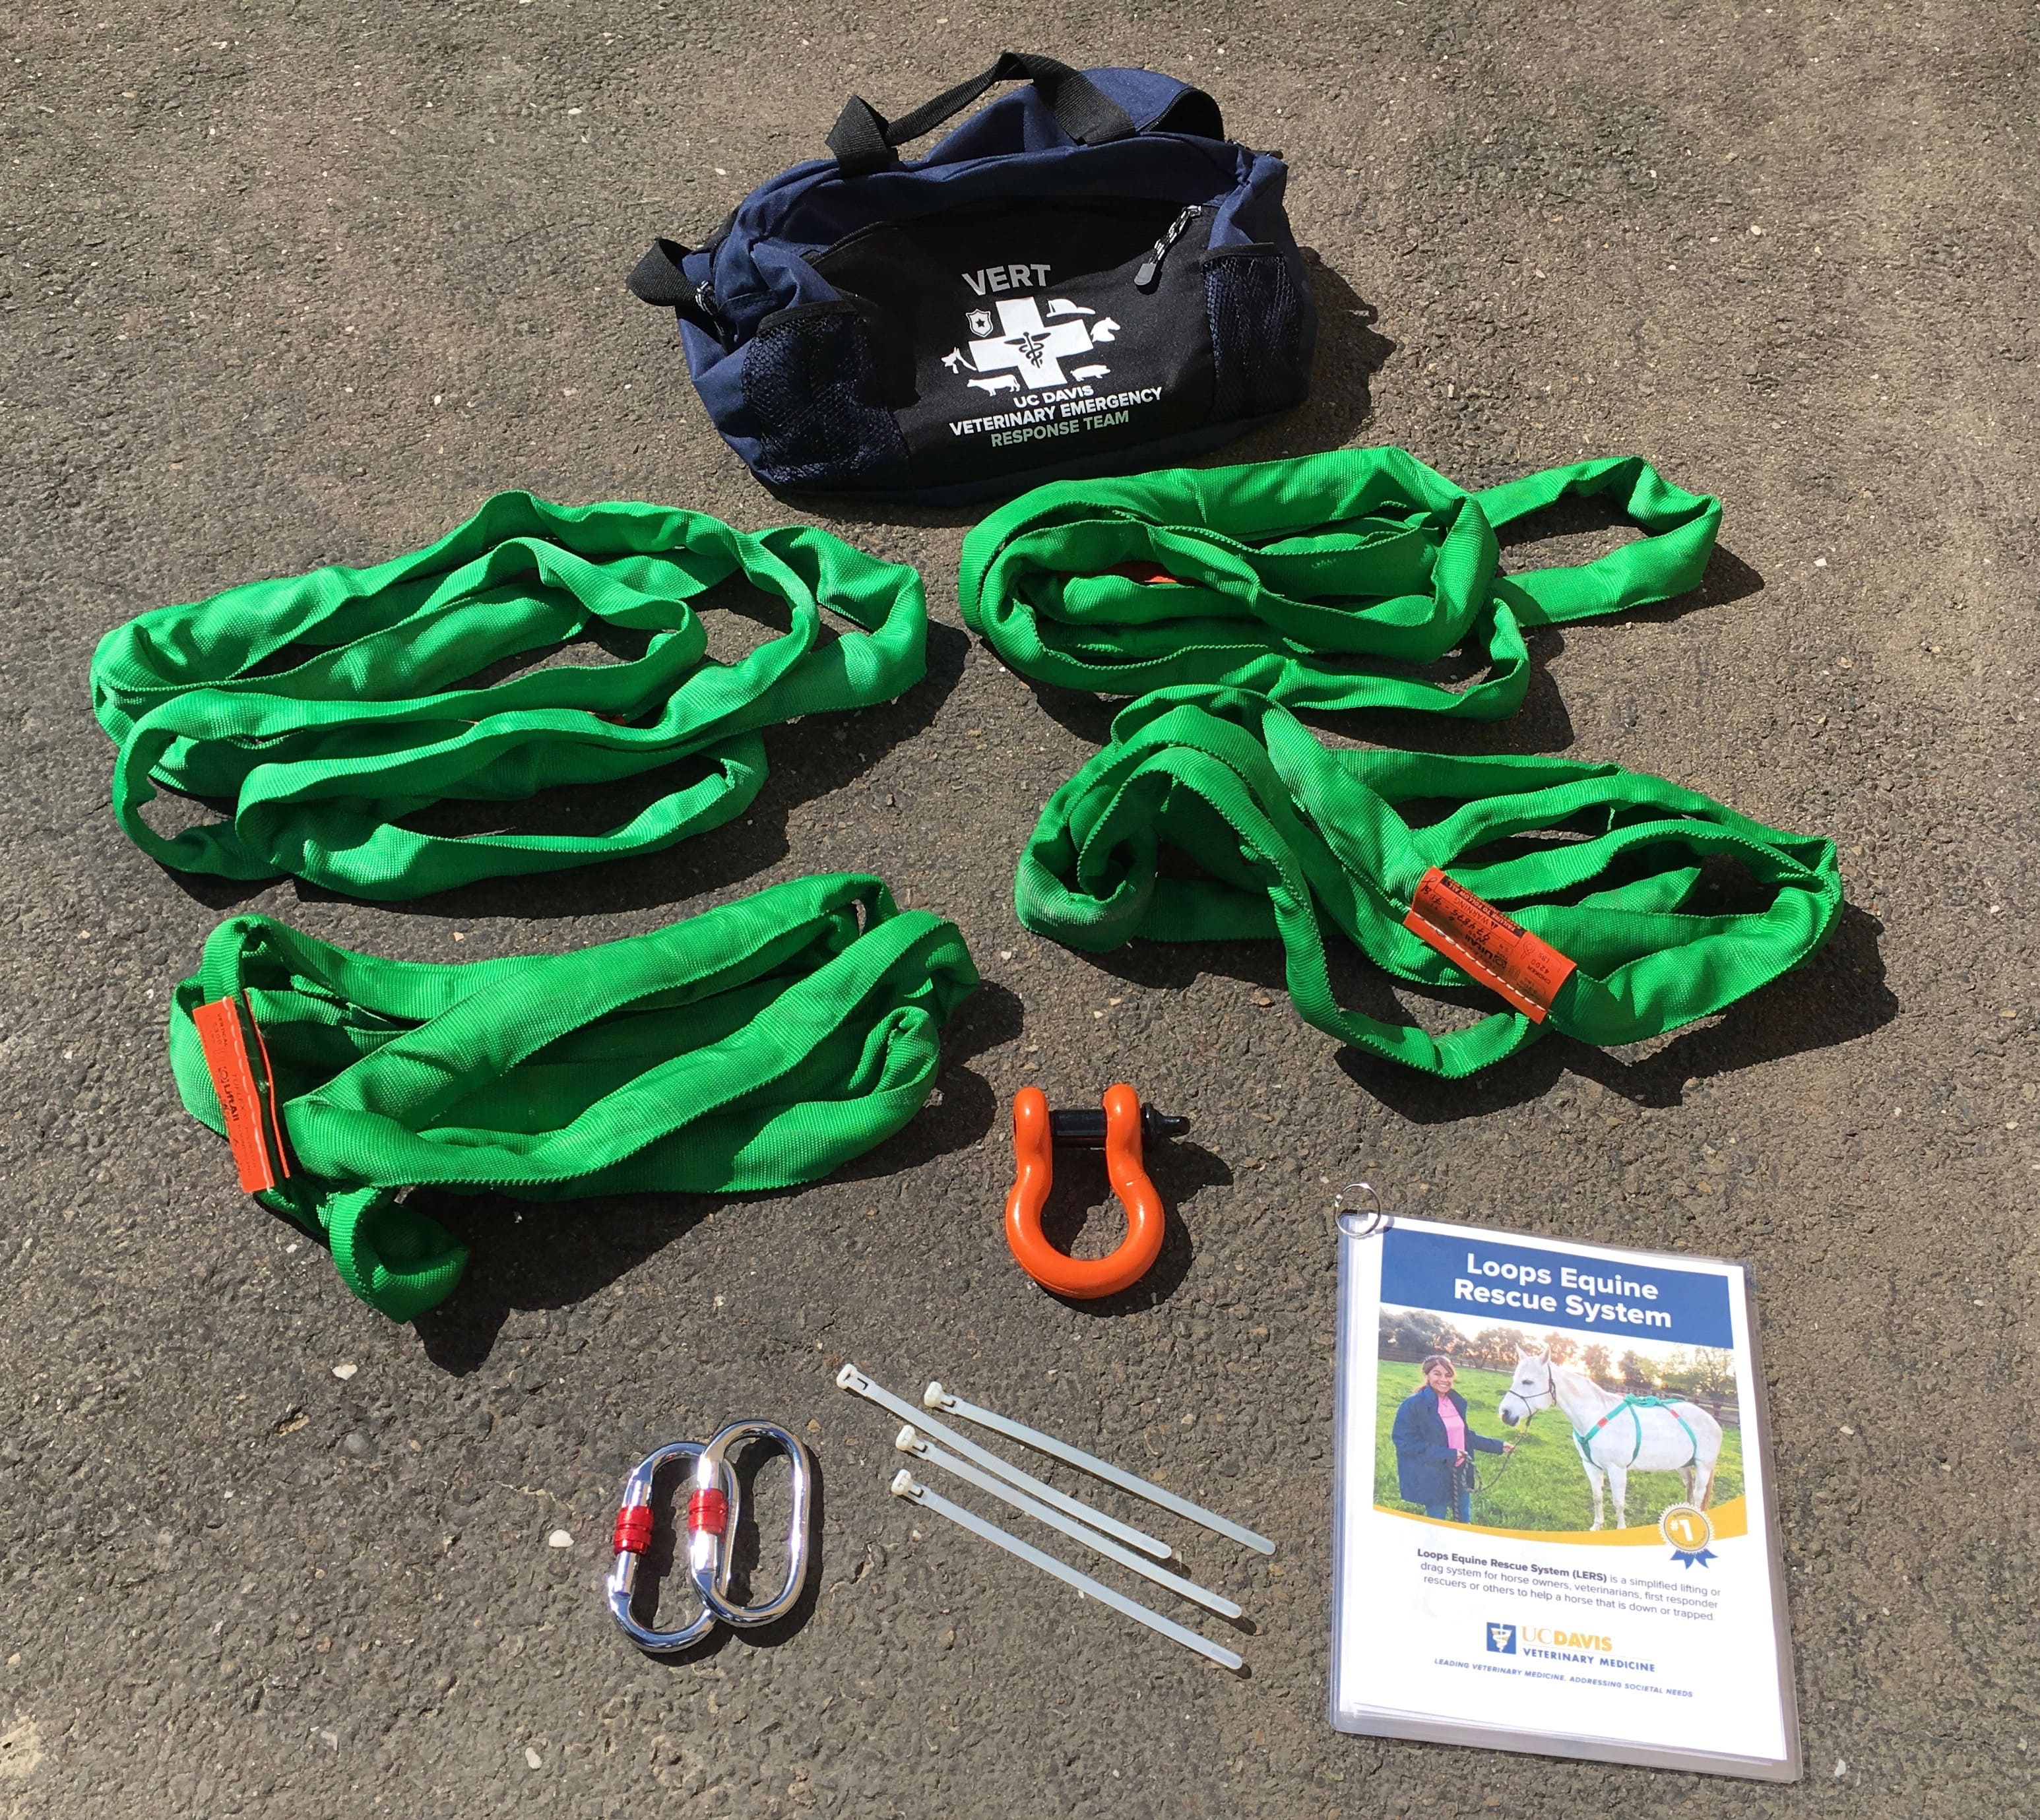 Contents of Loops Equine Rescue System